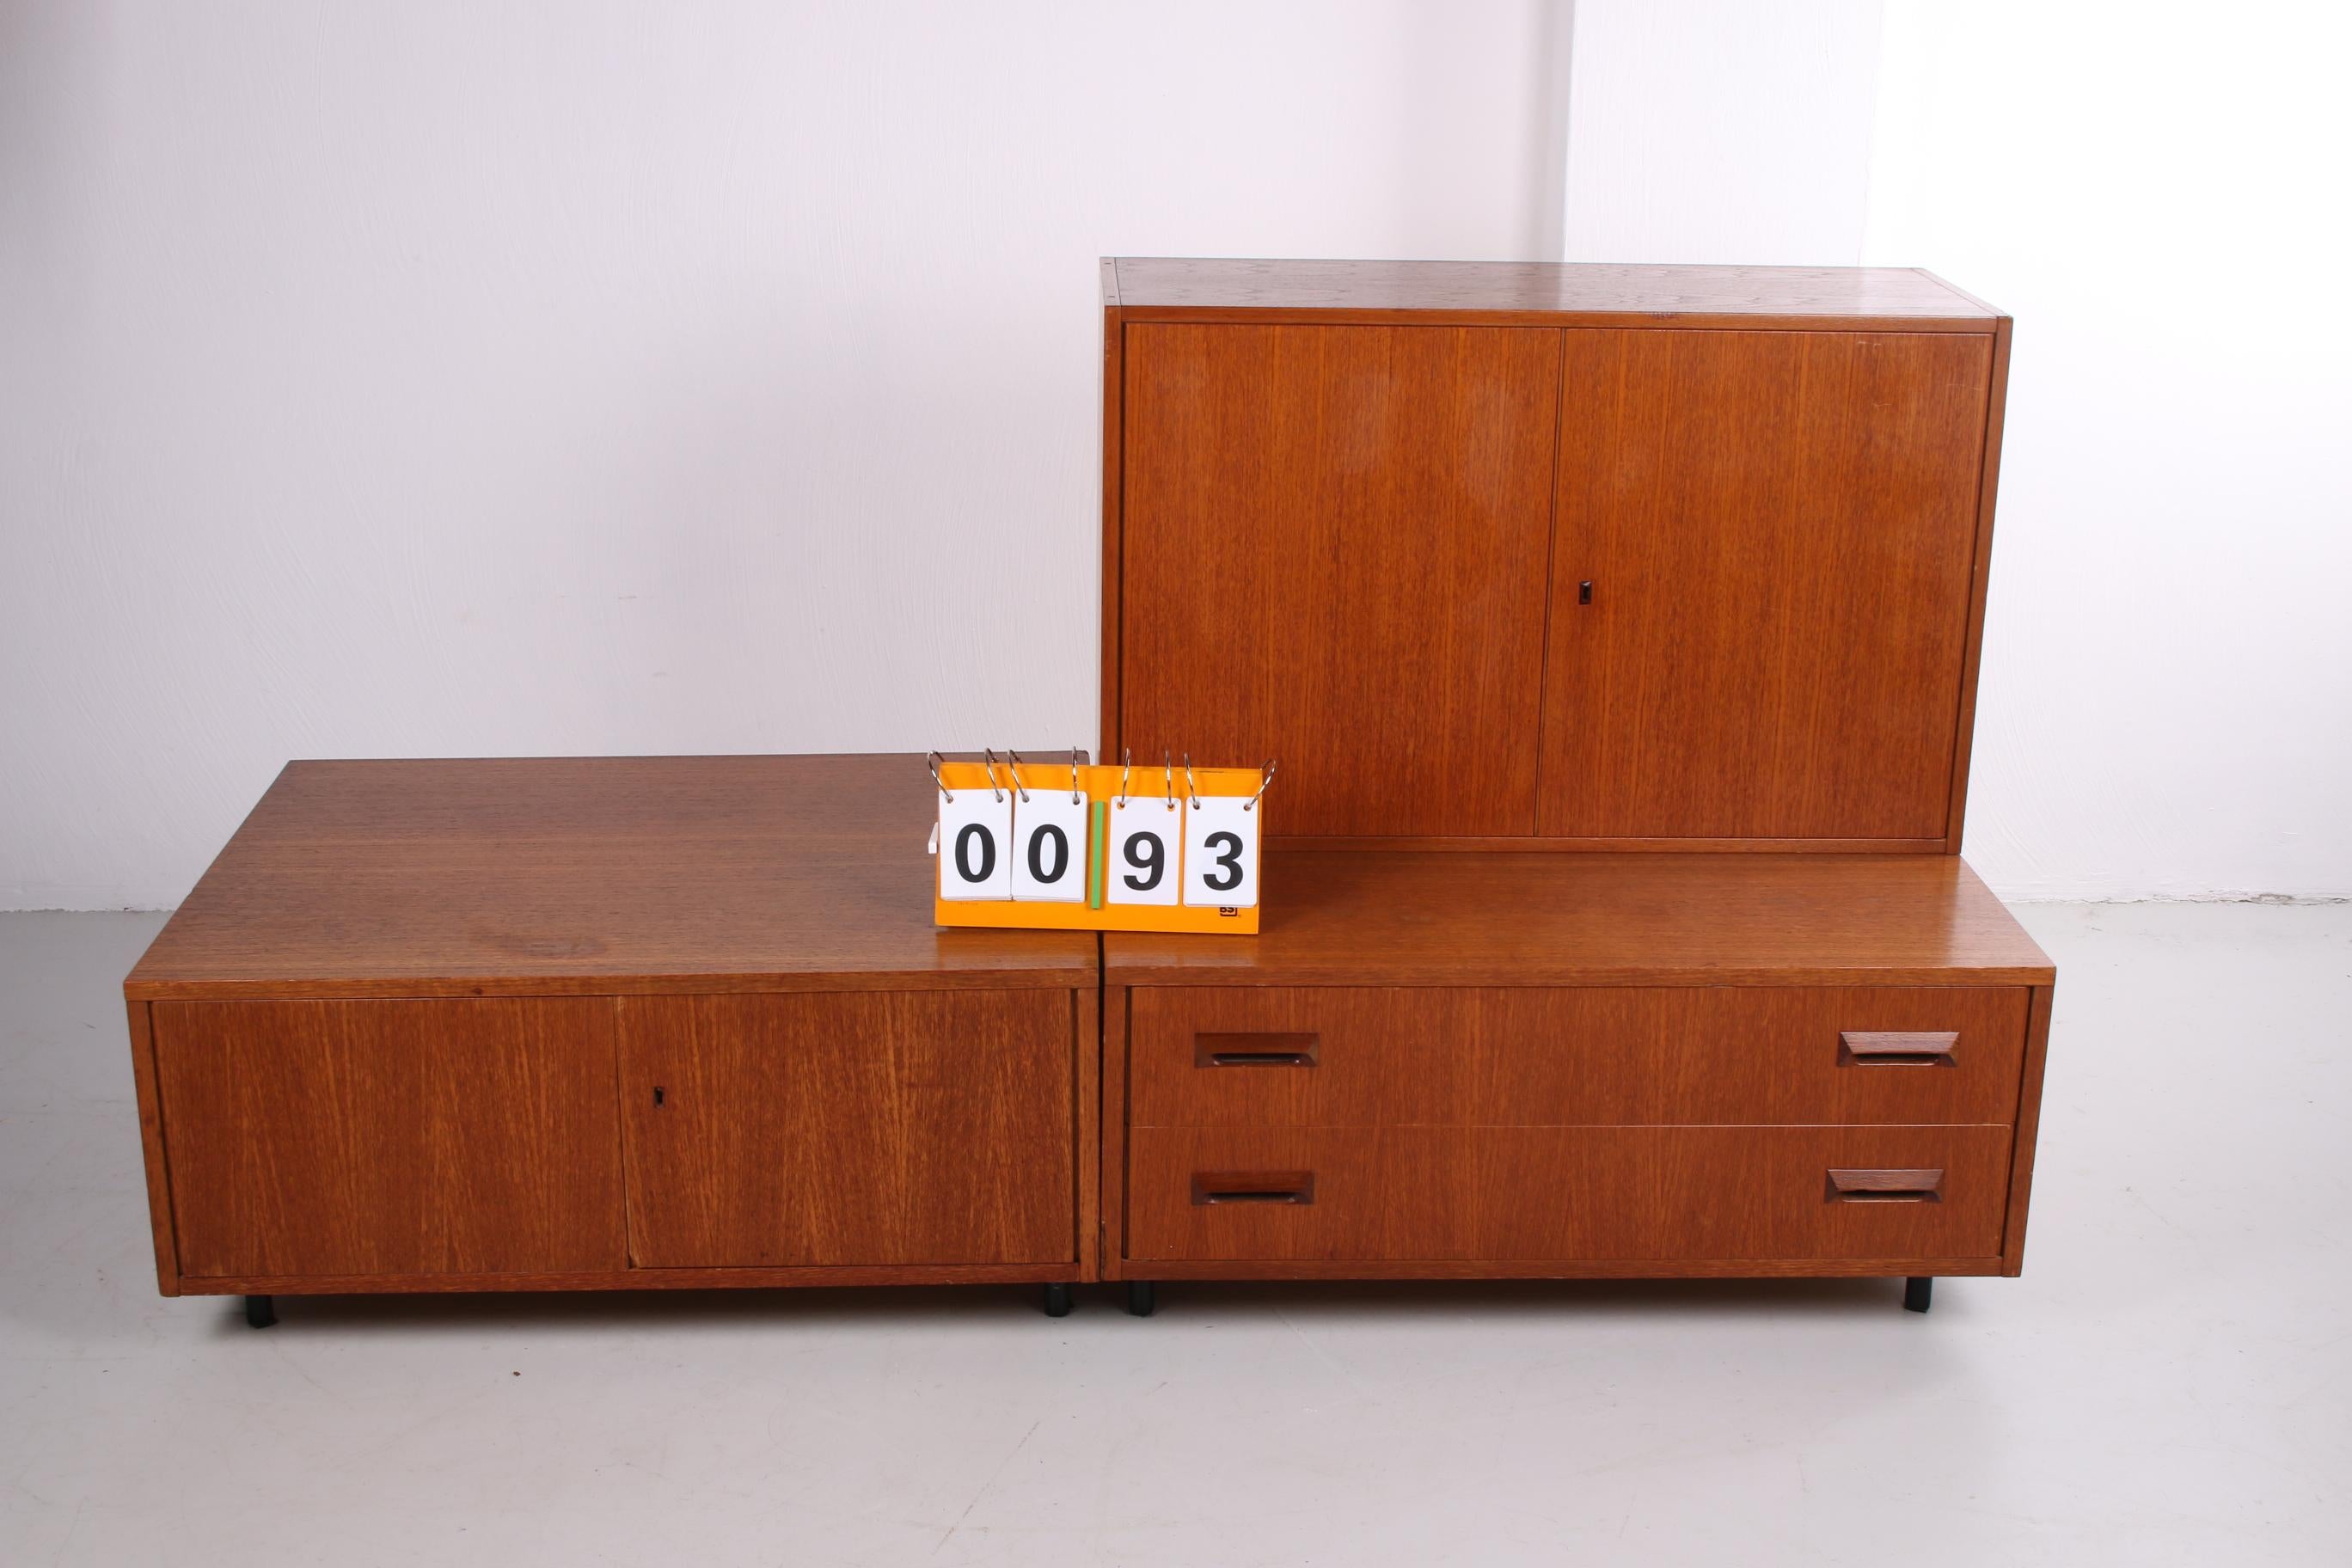 German Vintage Tv Furniture with Two Drawers and Three Separate Cabinets with Metal Leg